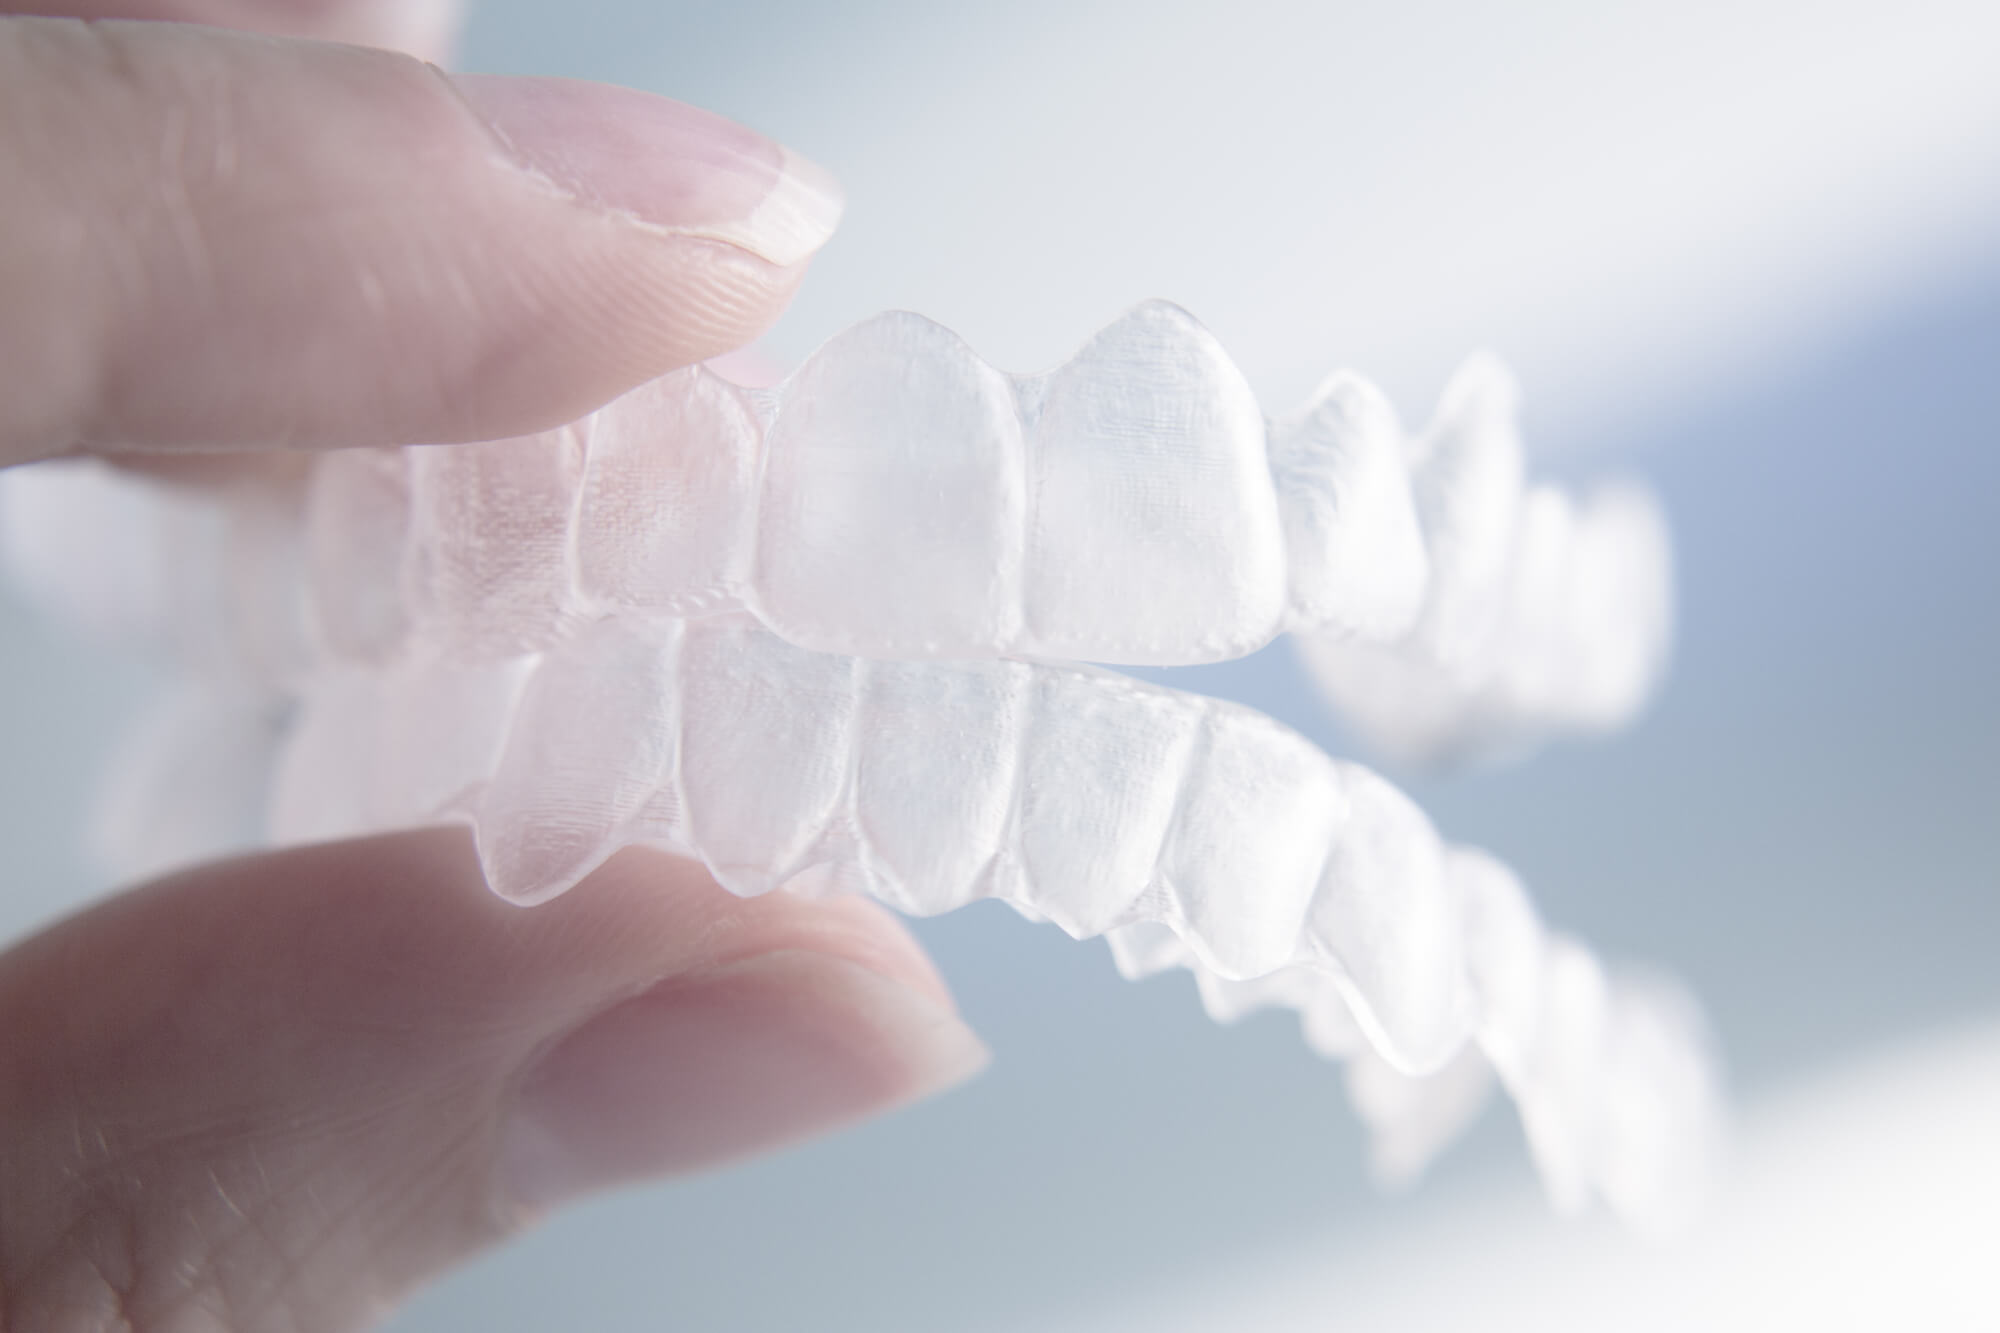 Where can I get Invisalign West Palm Beach?